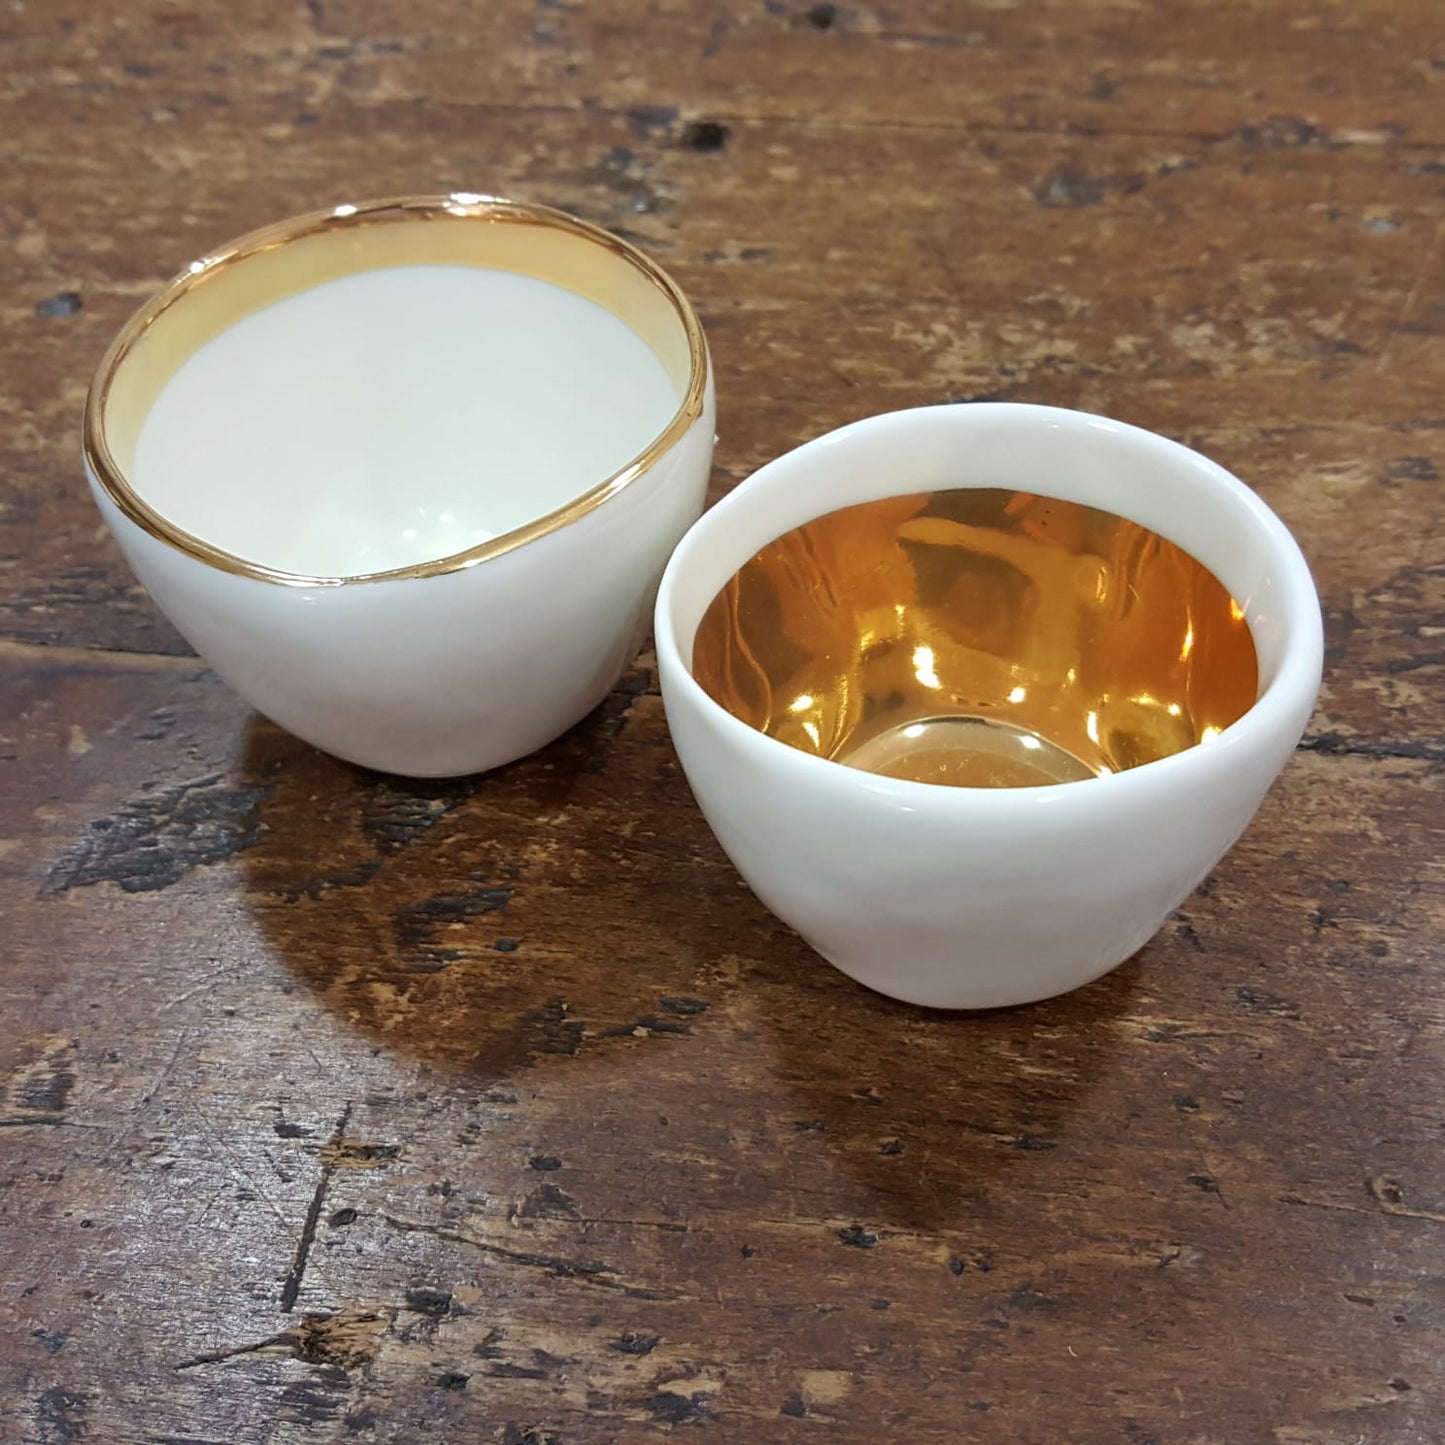 Porcelain and pure gold cups